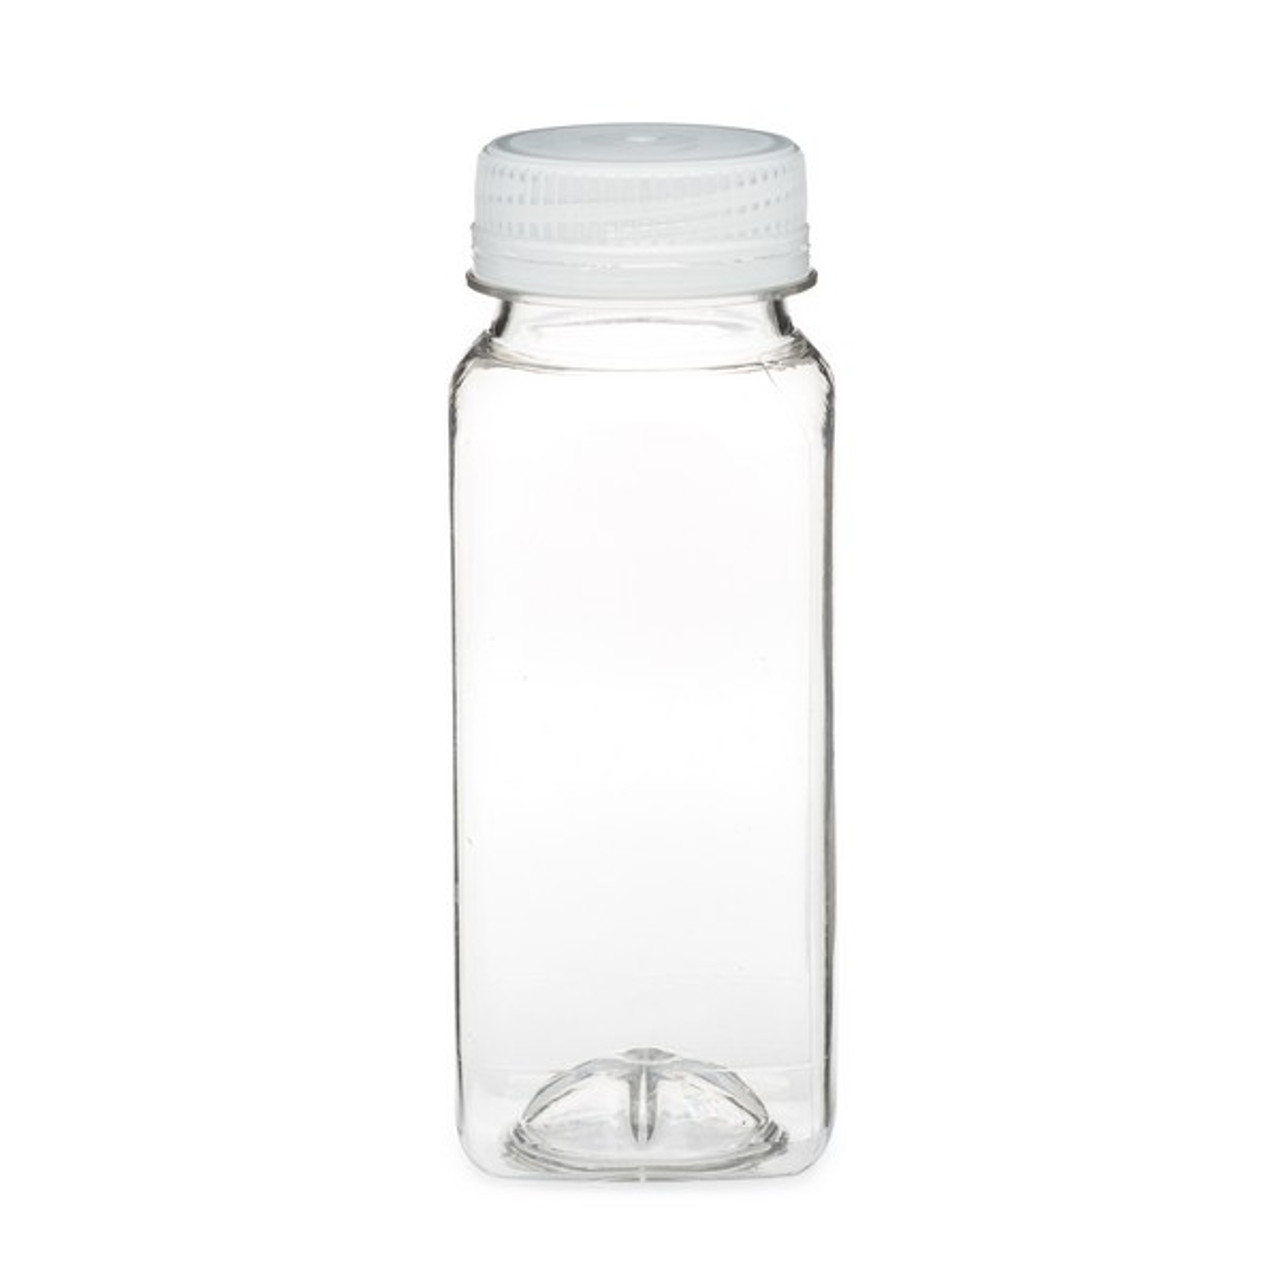 Clear PET Square Jars (Bulk) Caps Not Included